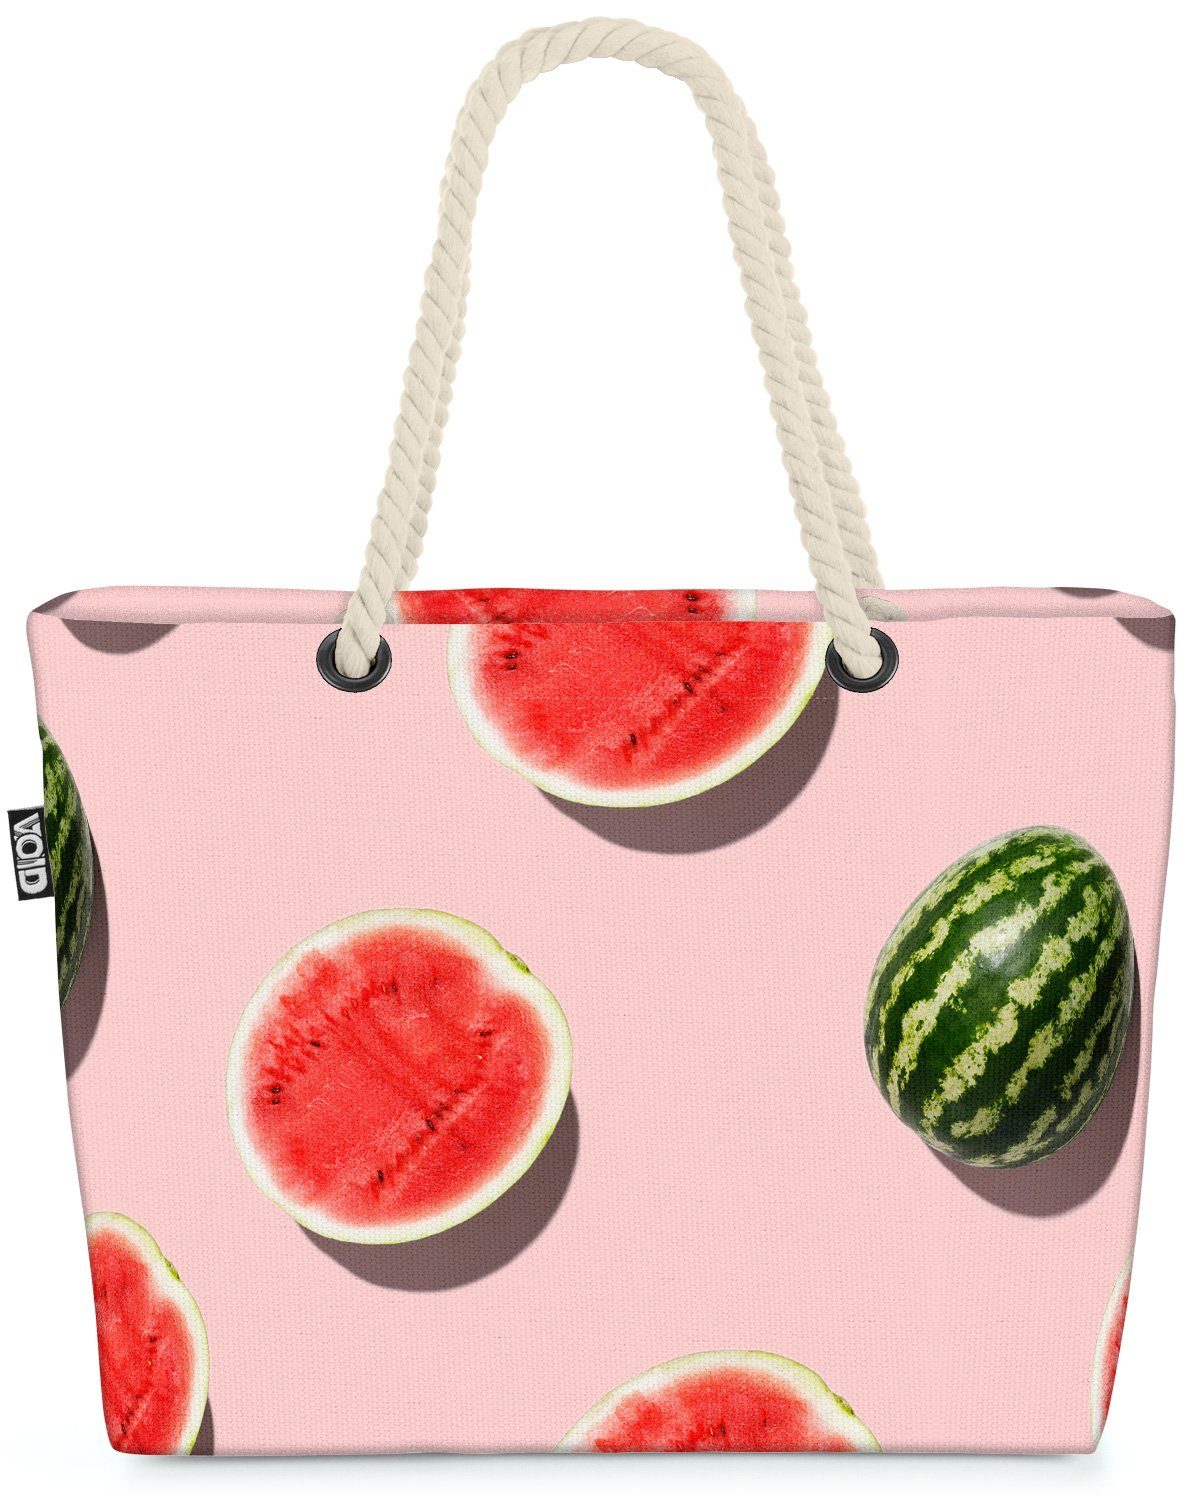 Sommer Melone (1-tlg), Melone VOID Sommer Frucht Party Party Strandtasche Wassermelone Obst Obst